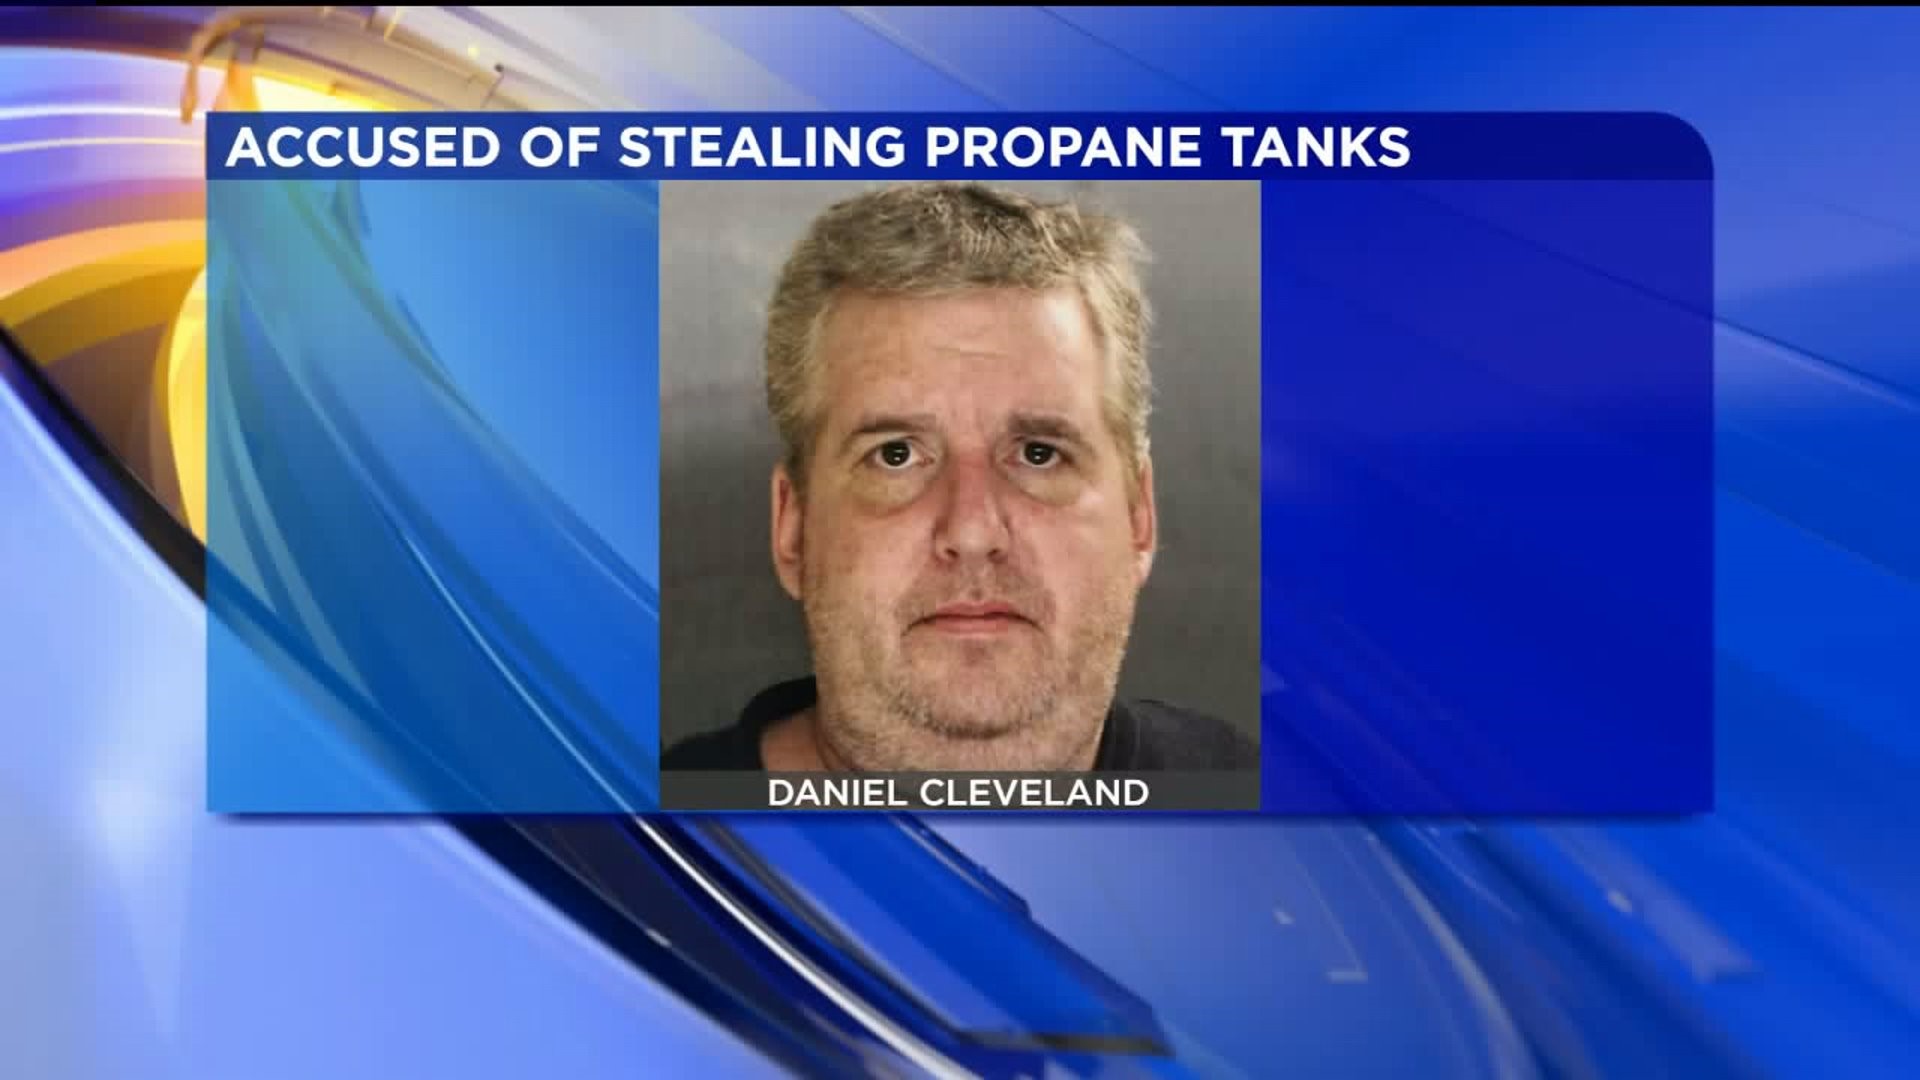 Workers Help Nab Suspected Propane Thief